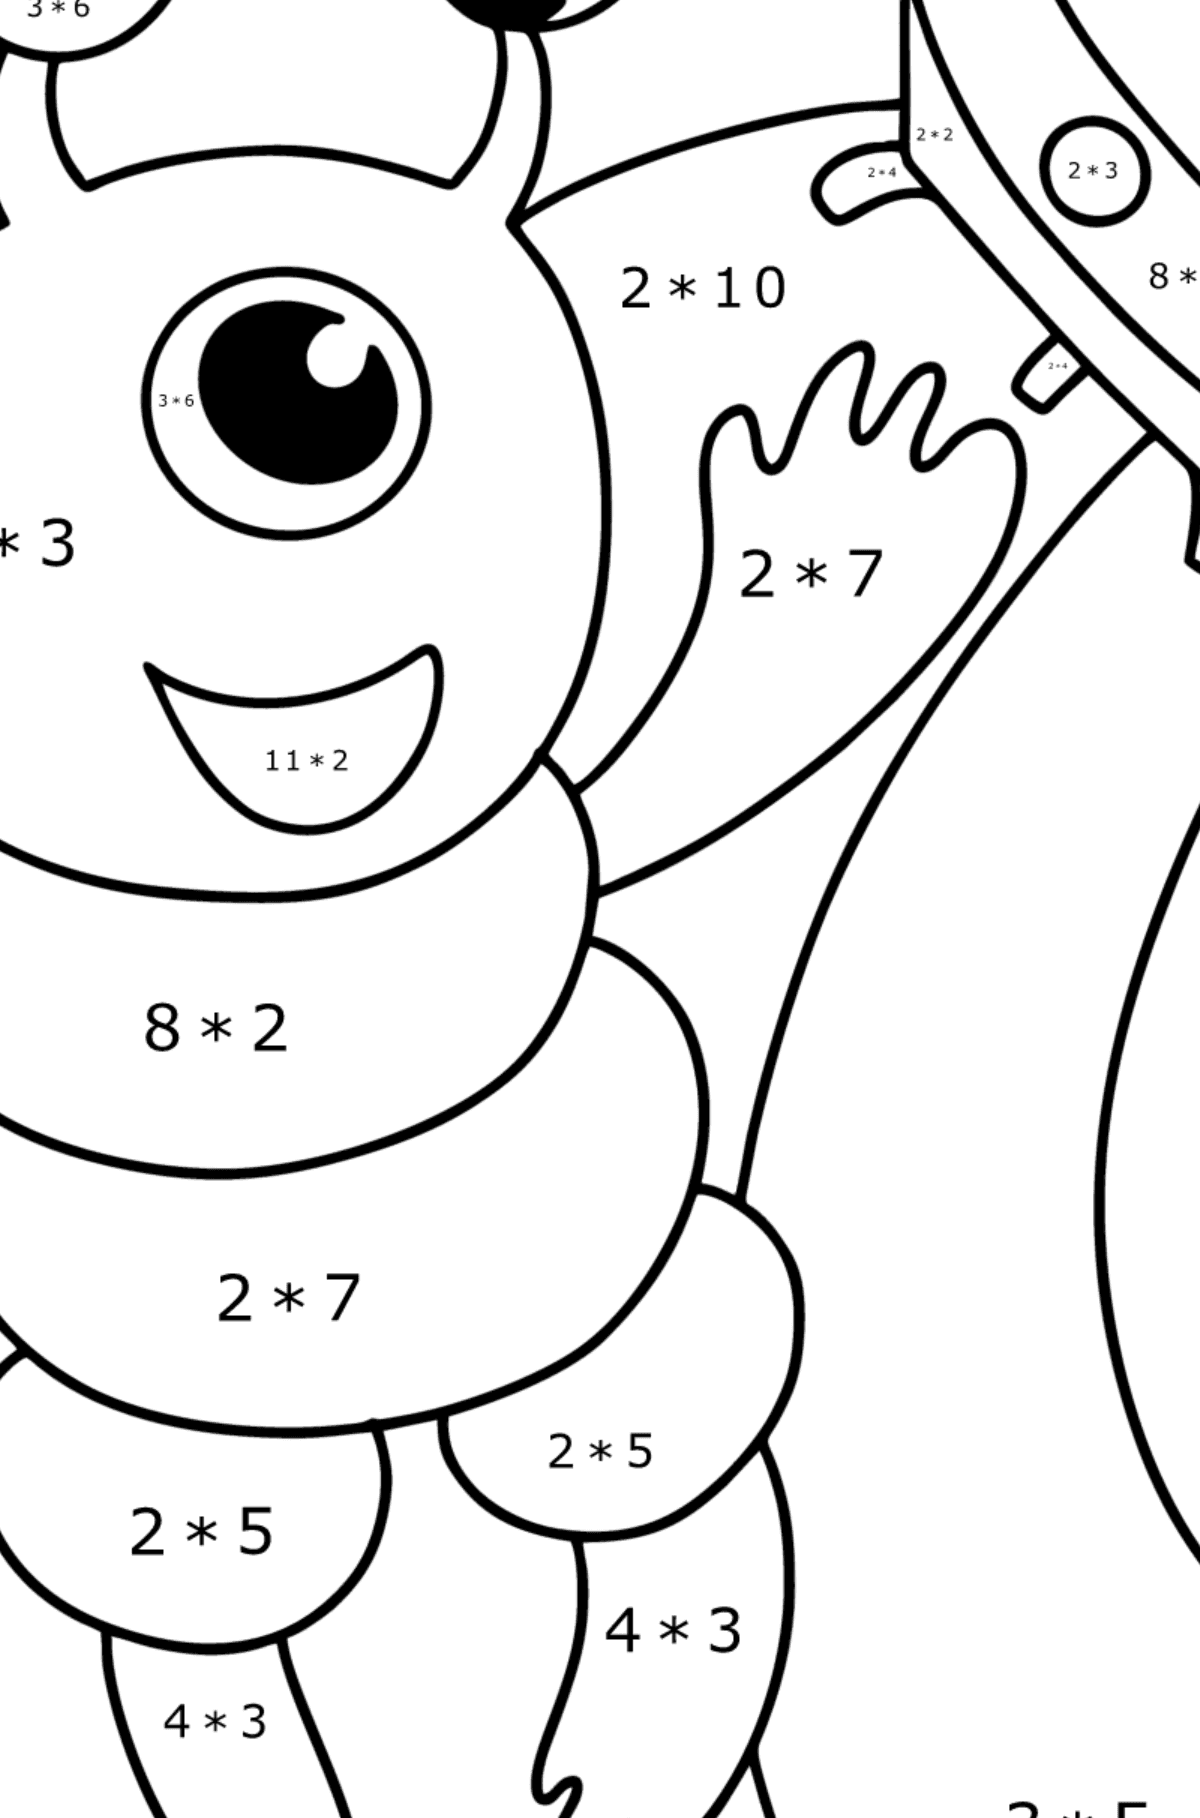 Alien in space coloring page - Math Coloring - Multiplication for Kids